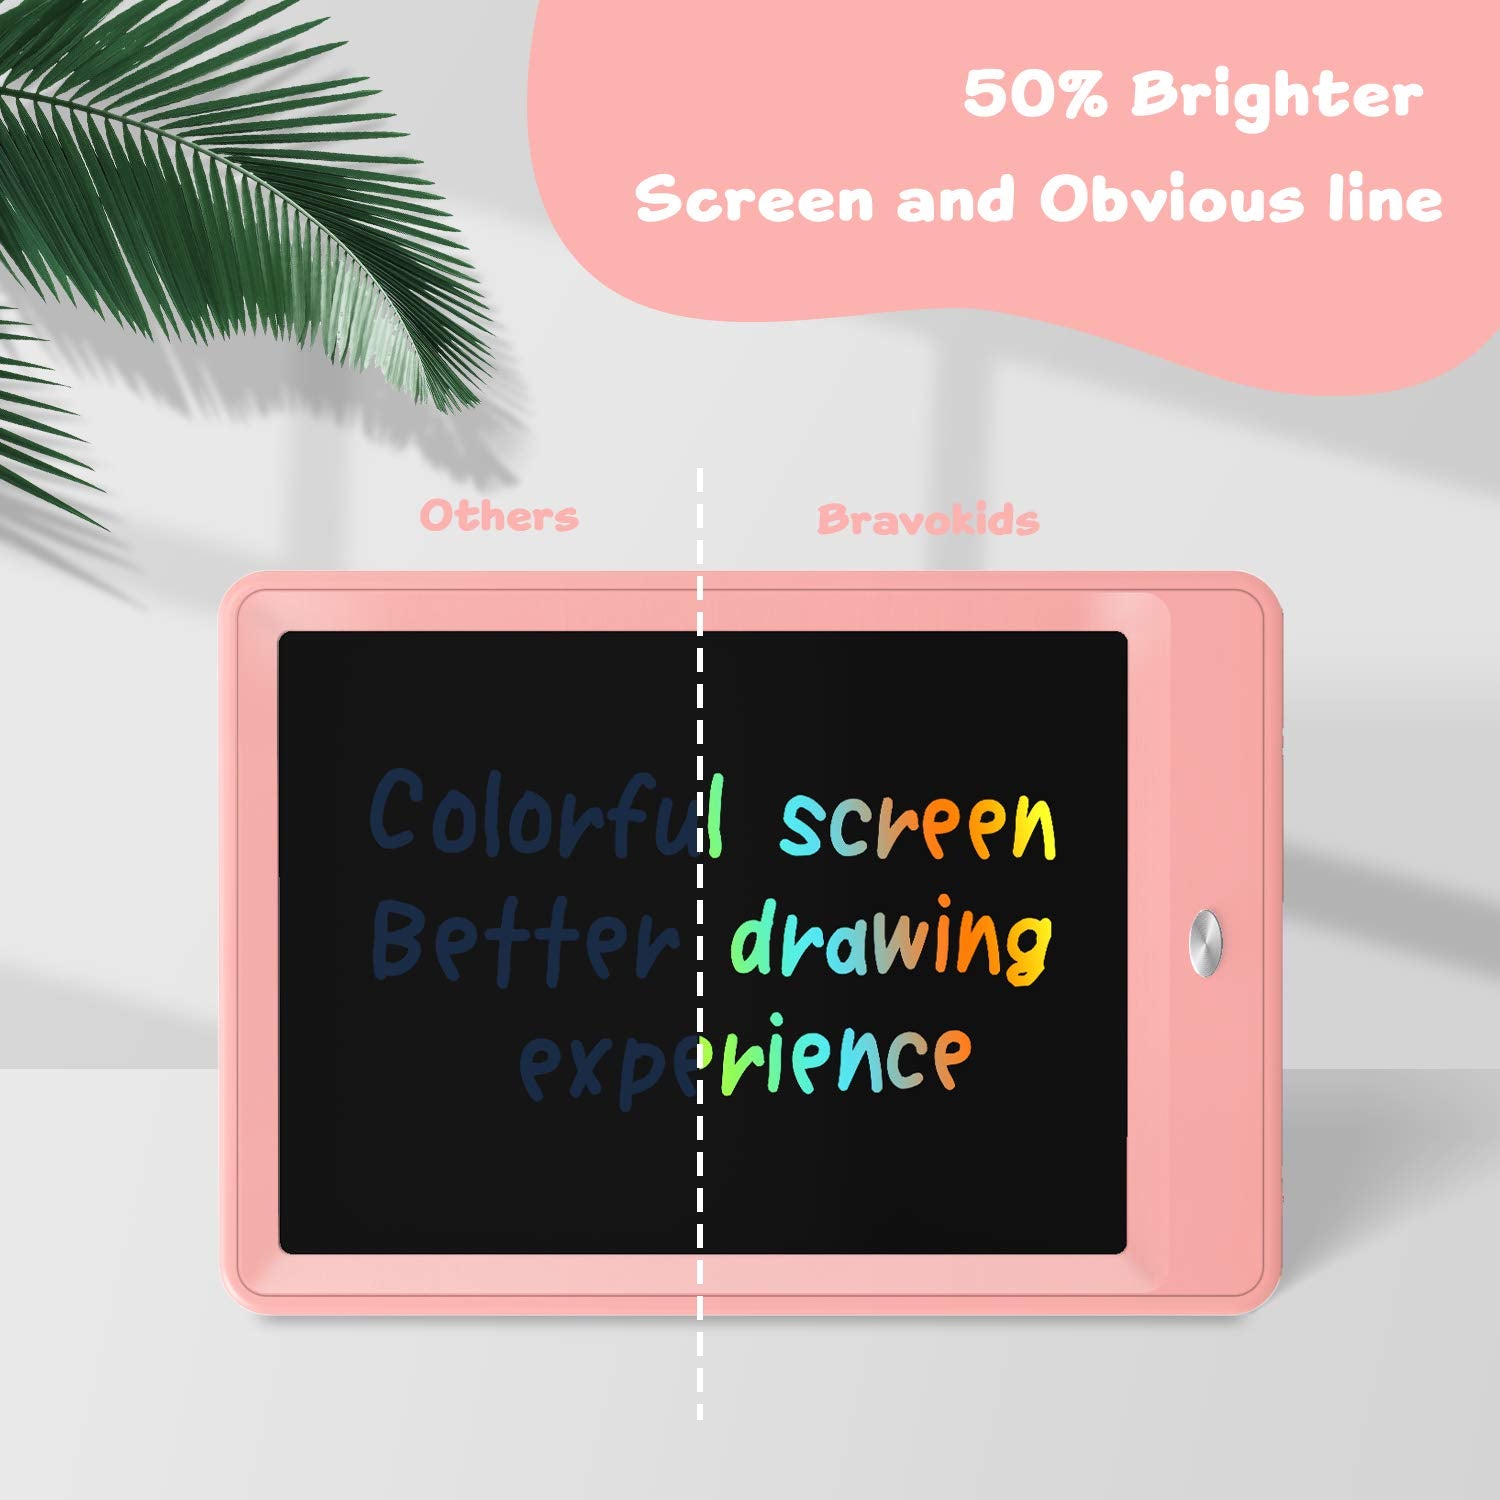 Bravokids Toys for 3-6 Years Old Girls Boys, LCD Writing Tablet 10 Inch Doodle Board, Electronic Drawing Tablet Drawing Pads, Educational Birthday Gift for 3 4 5 6 7 8 Years Old Kids Toddler (Pink)